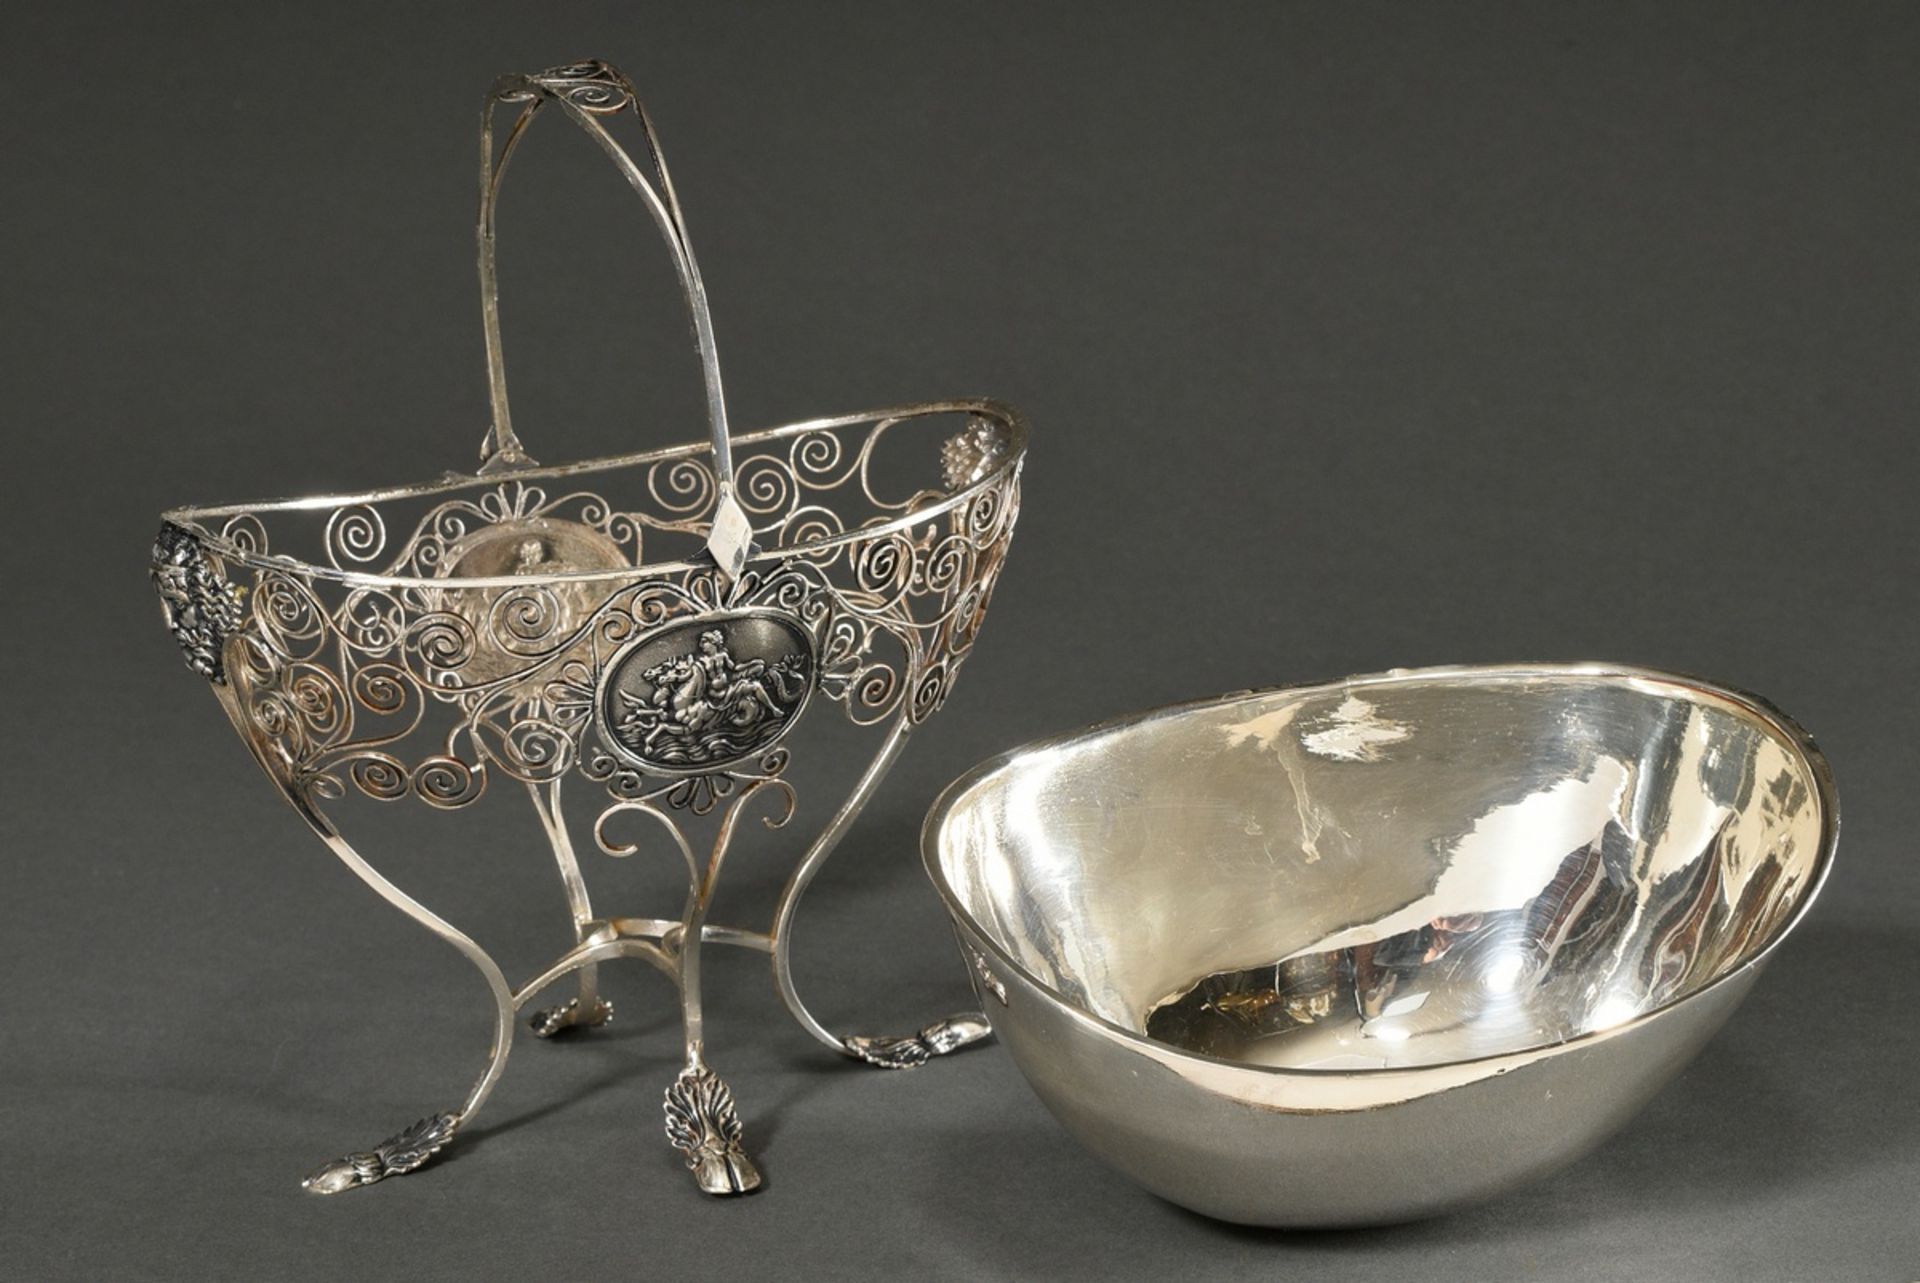 Classic Empire sugar basket with filigree work and oval relief fondi ‘Mythological scenes’, silver, - Image 4 of 4